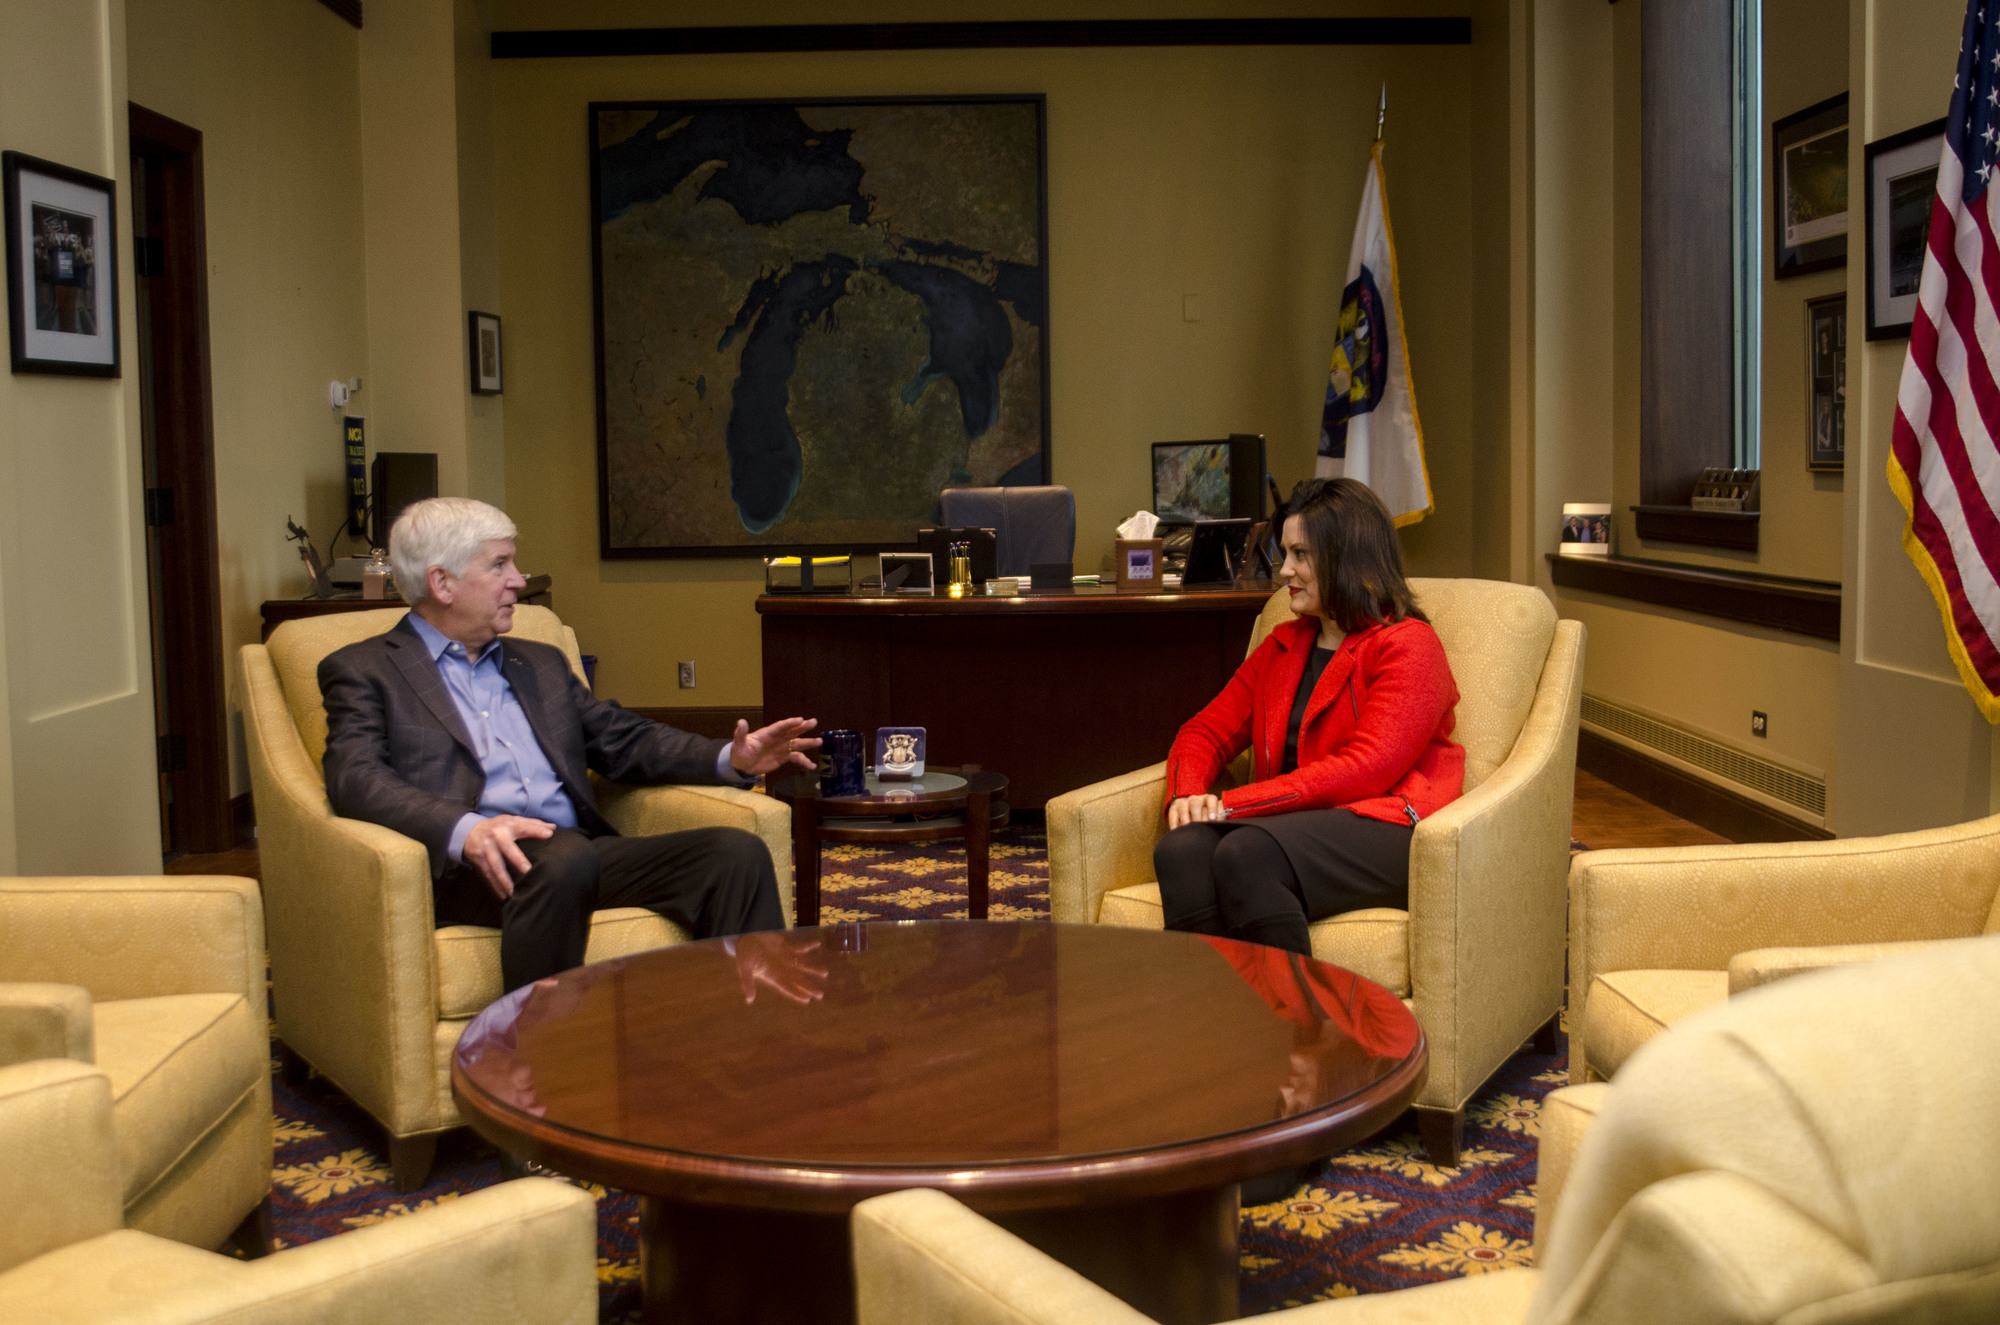 Gov. Snyder meets with Governor-elect Gretchen Whitmer